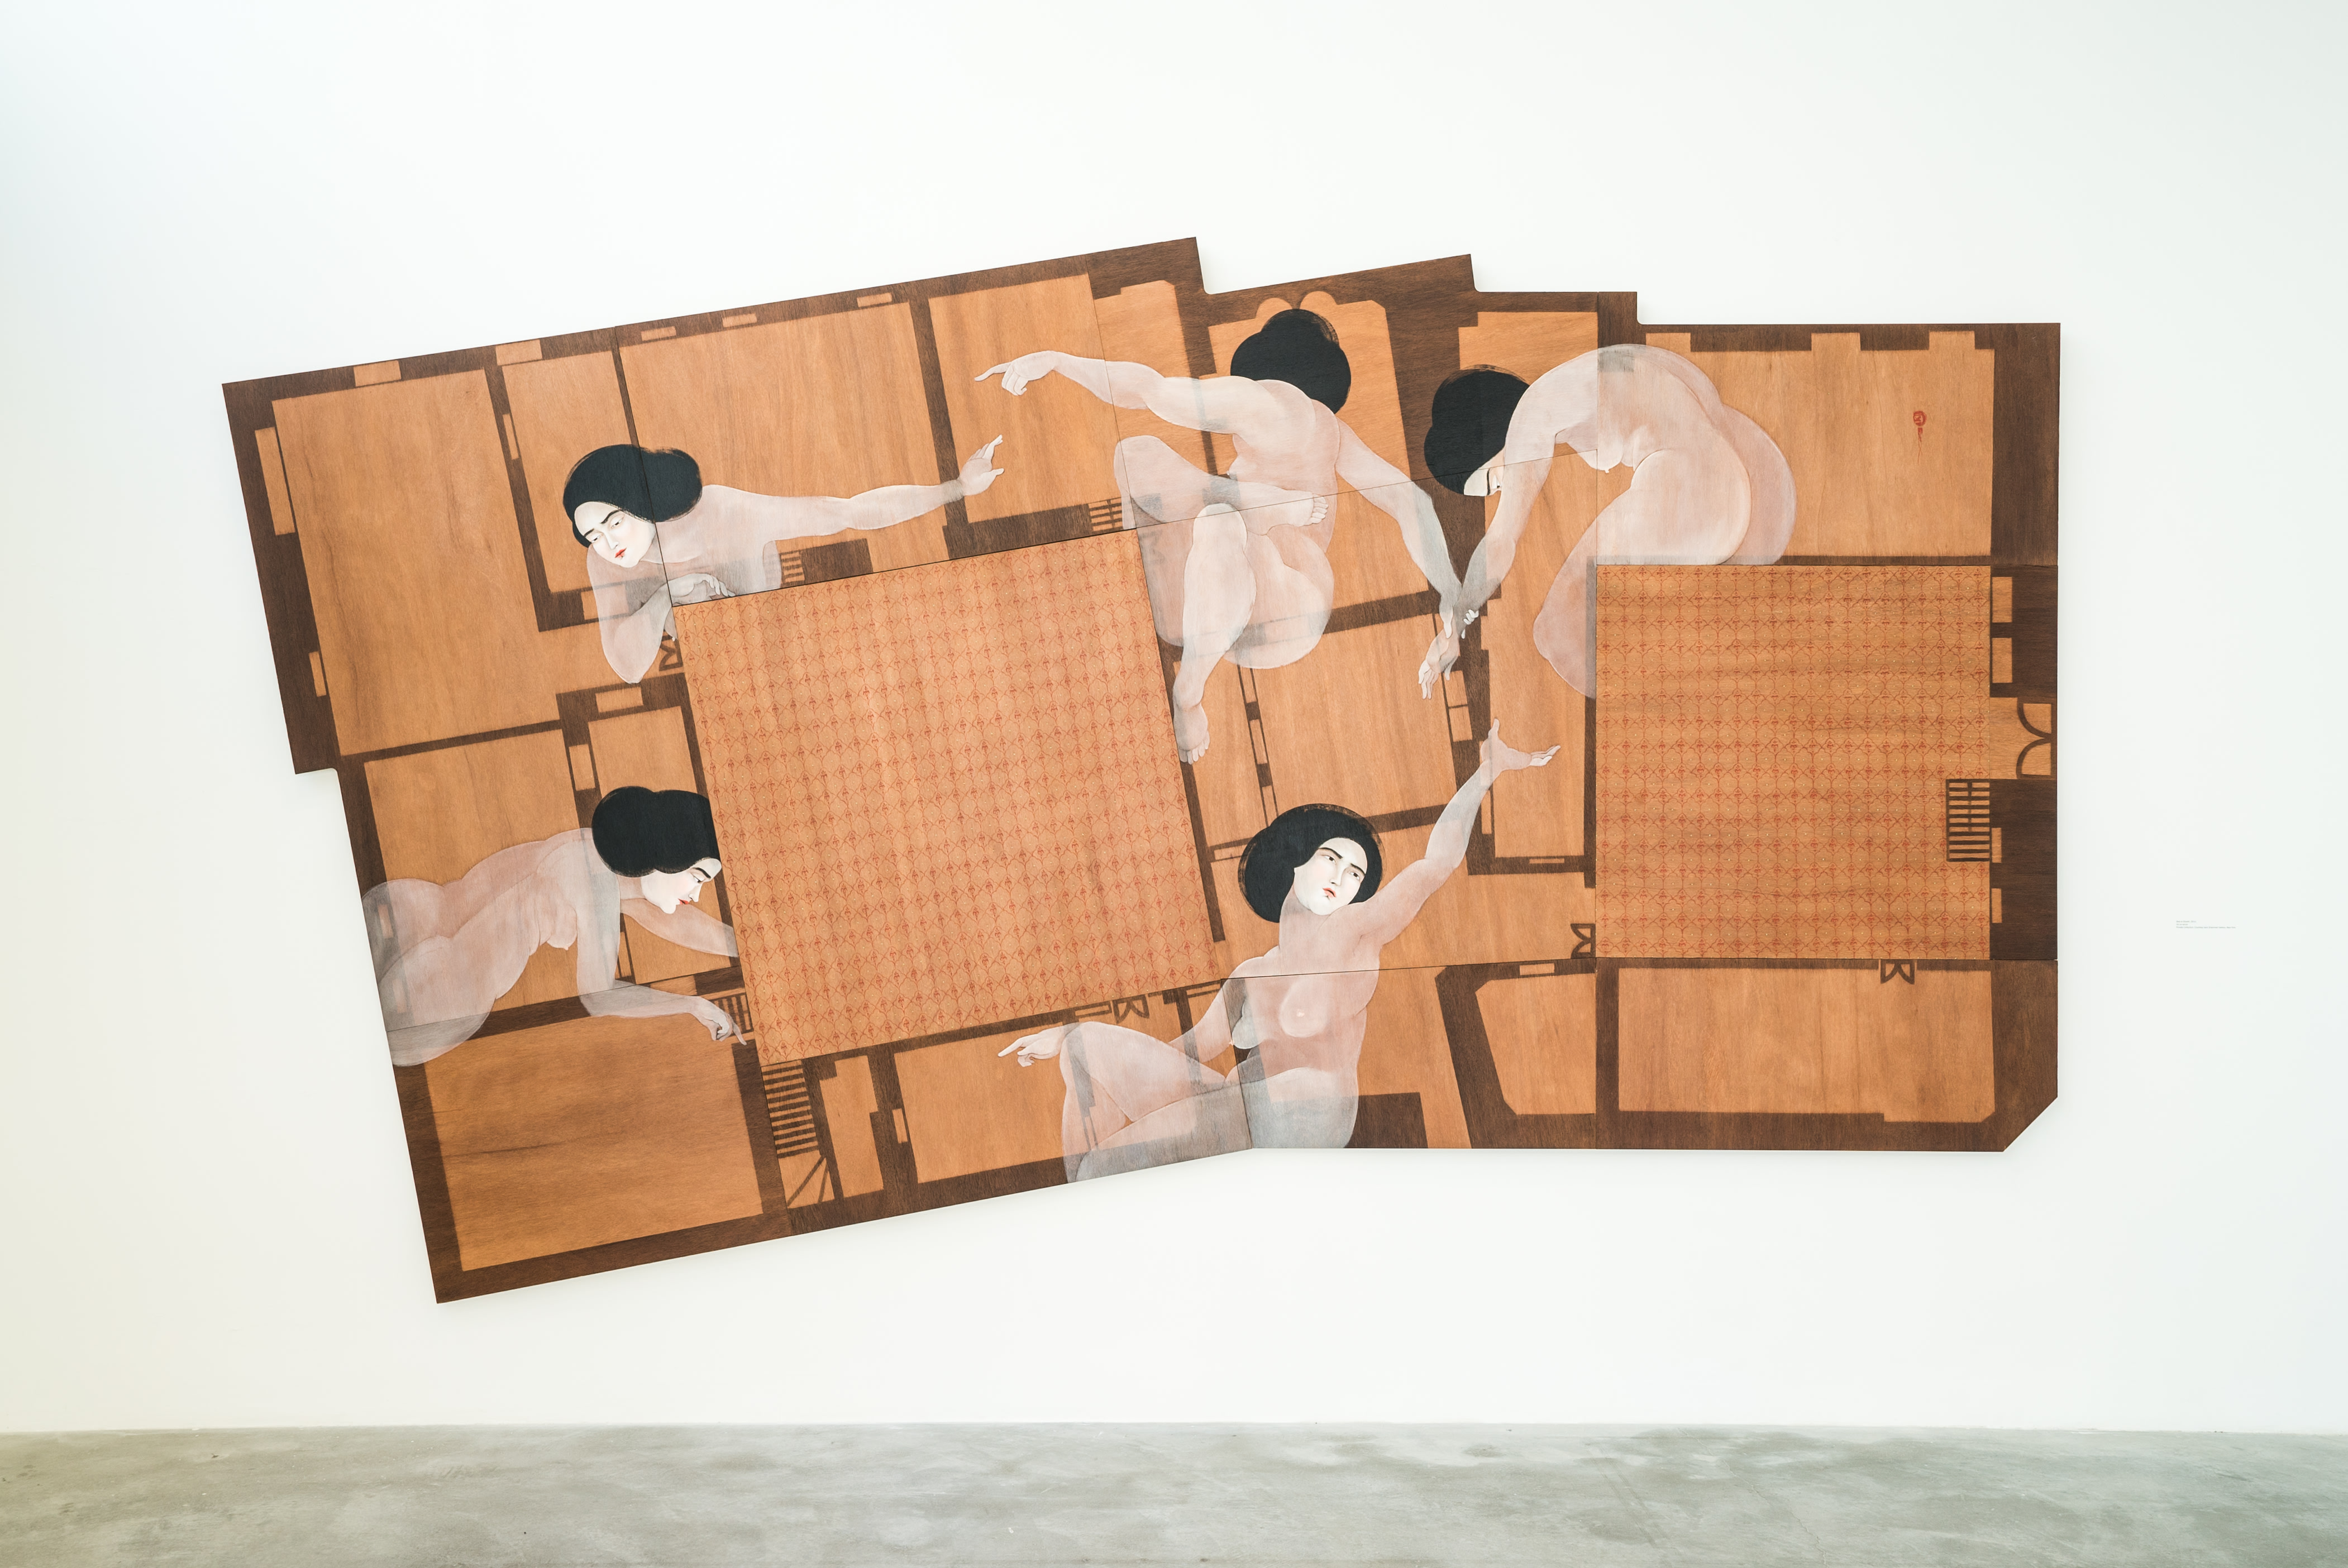 Hayv Kahraman Acts of Reparation